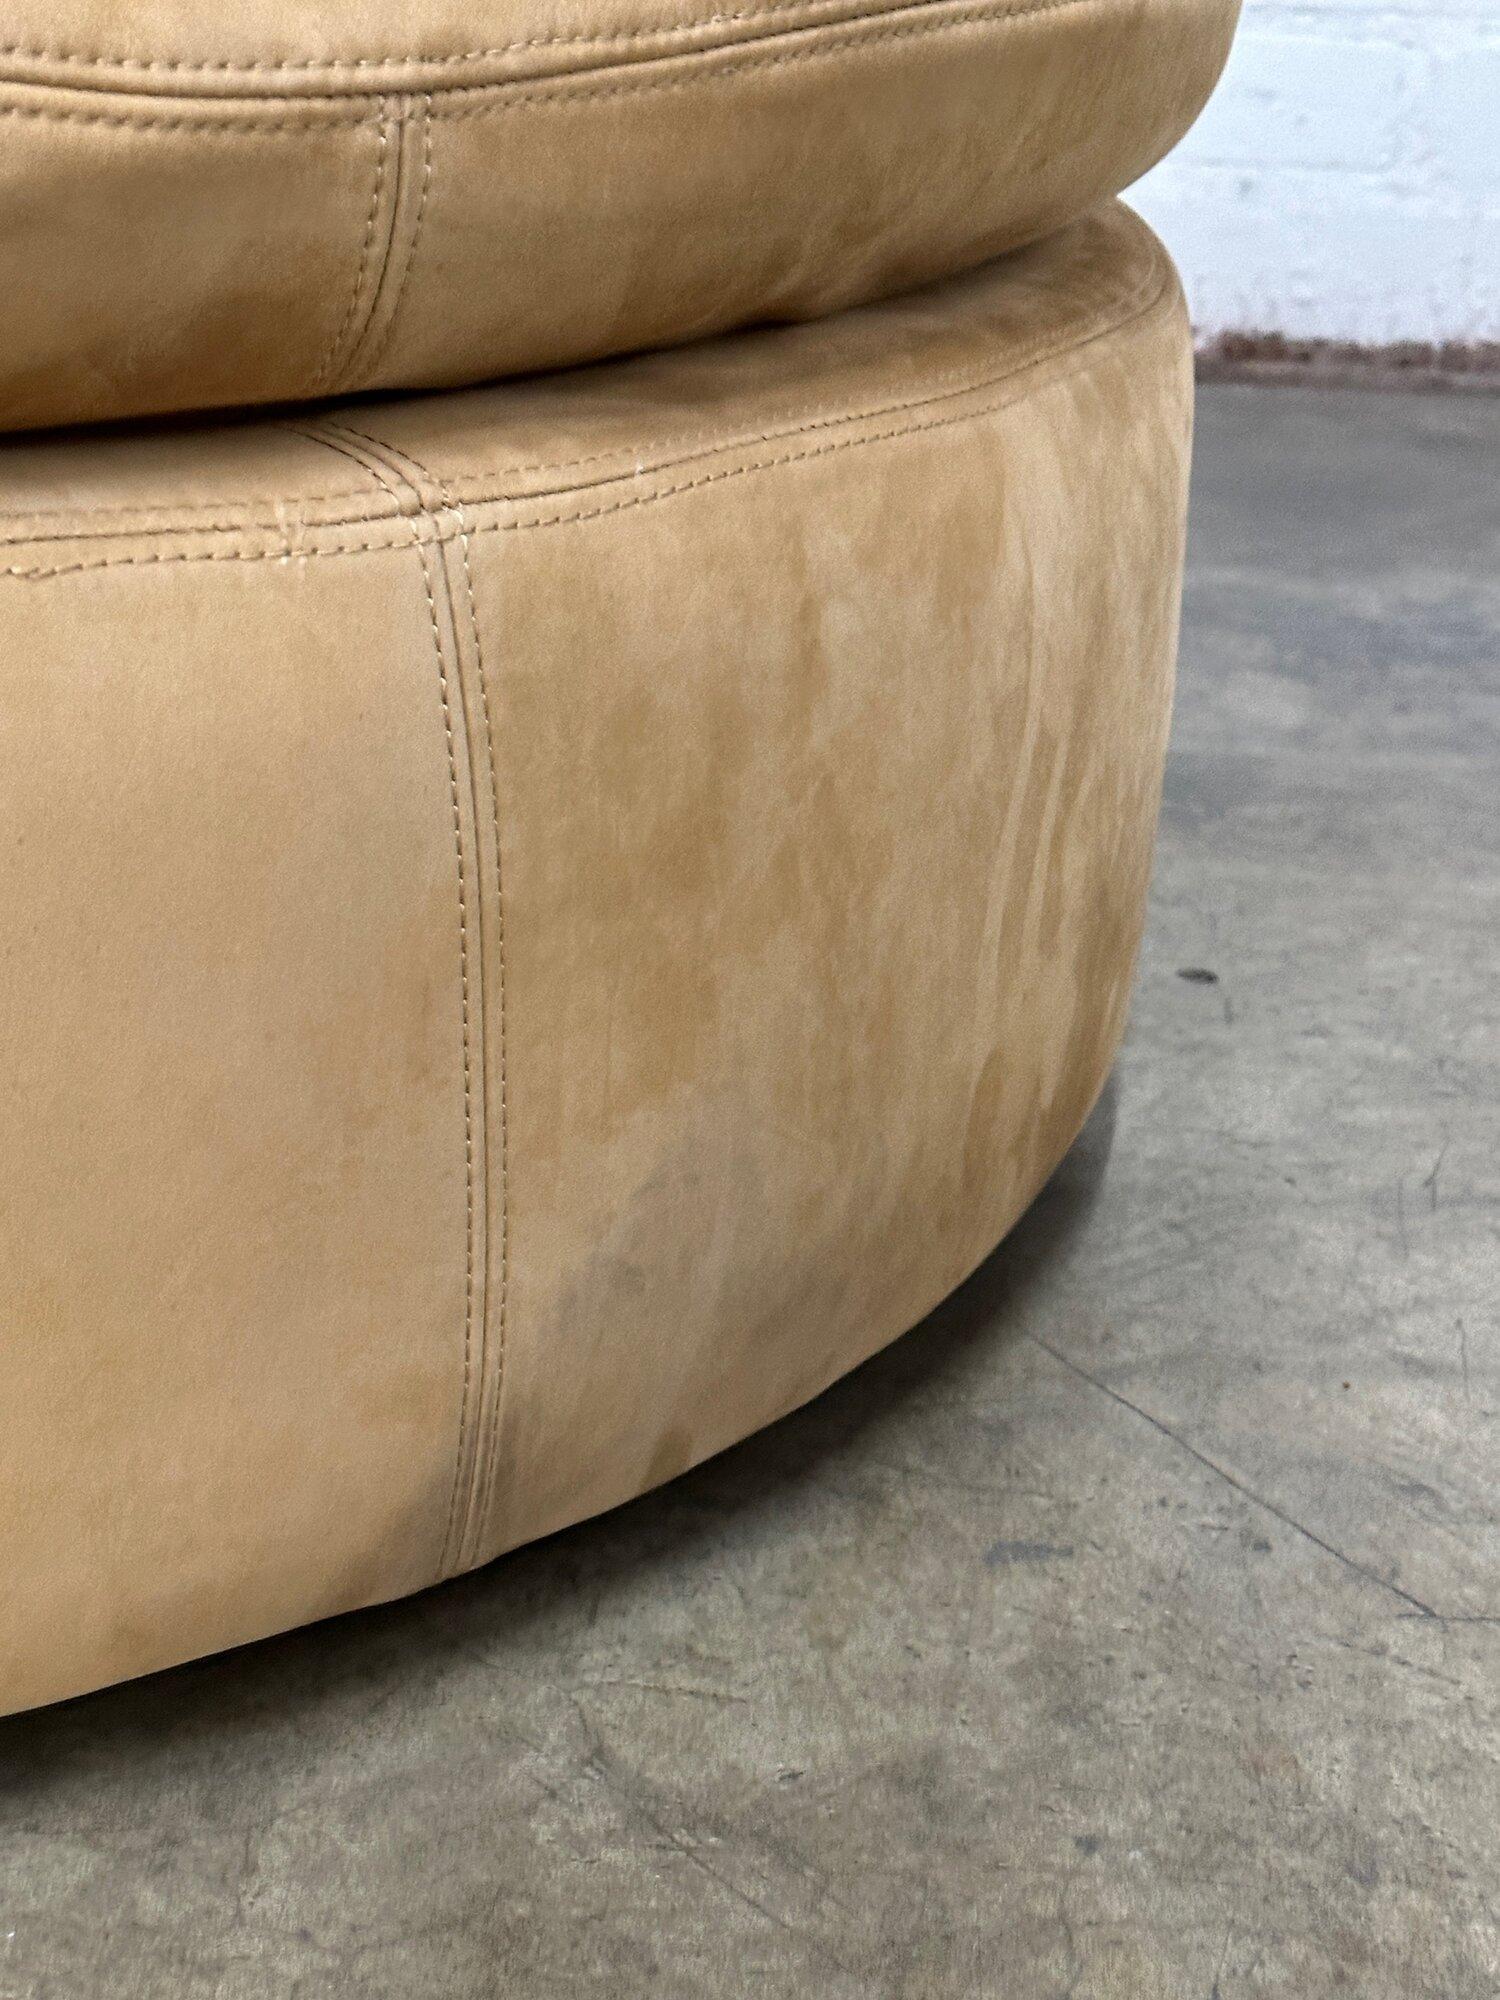 Contemporary Tan Leather Ottoman In Good Condition For Sale In Los Angeles, CA